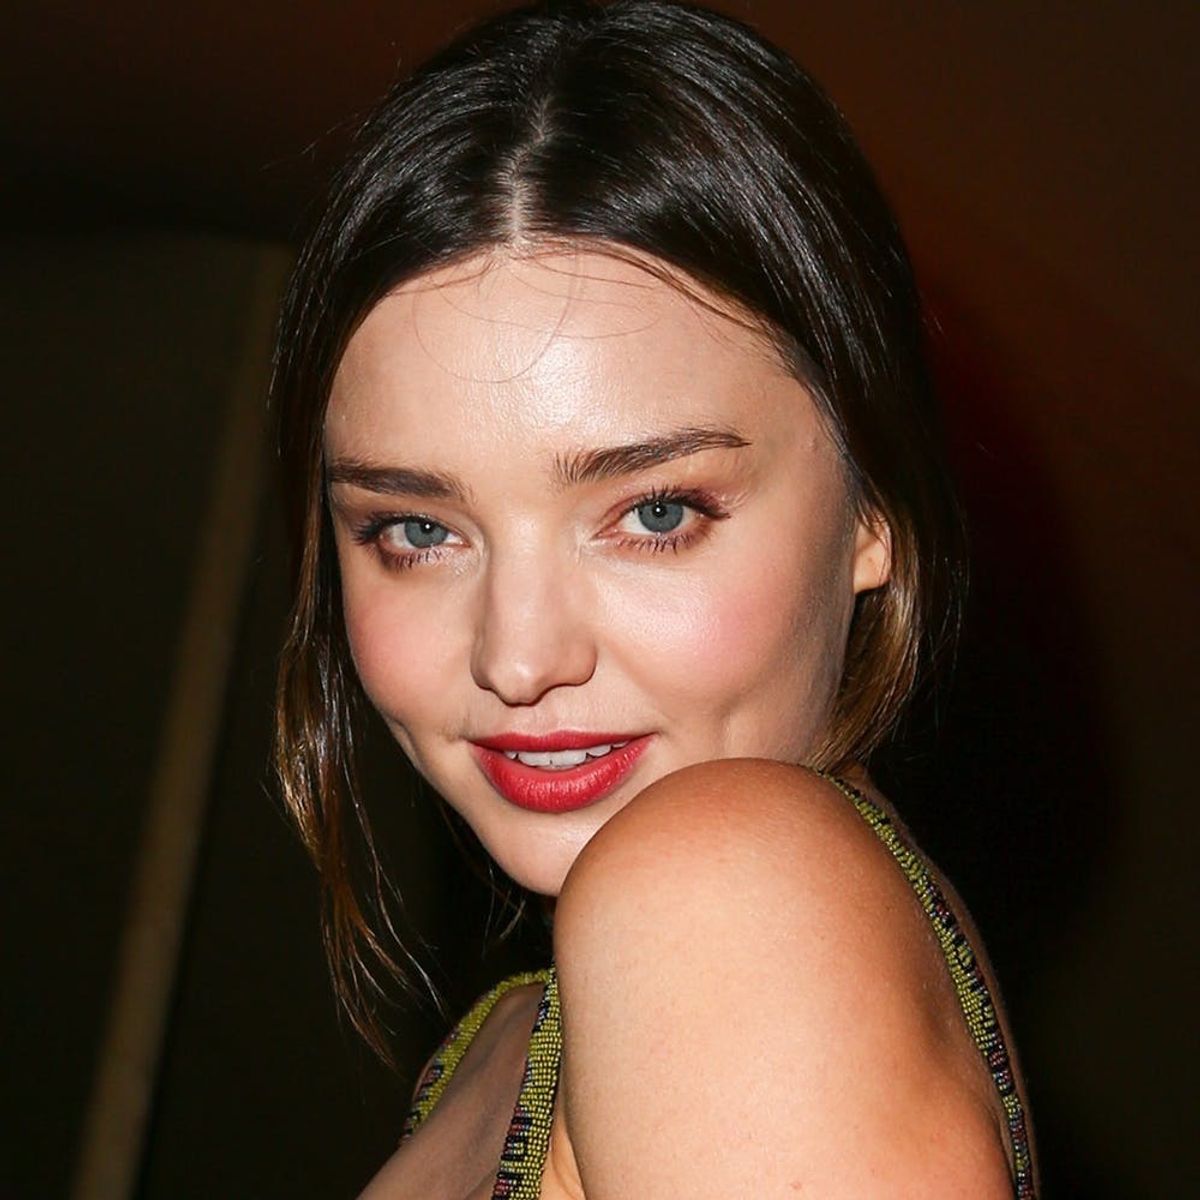 Check Out Miranda Kerr’s Wedding Ring Sparkling on the Runway